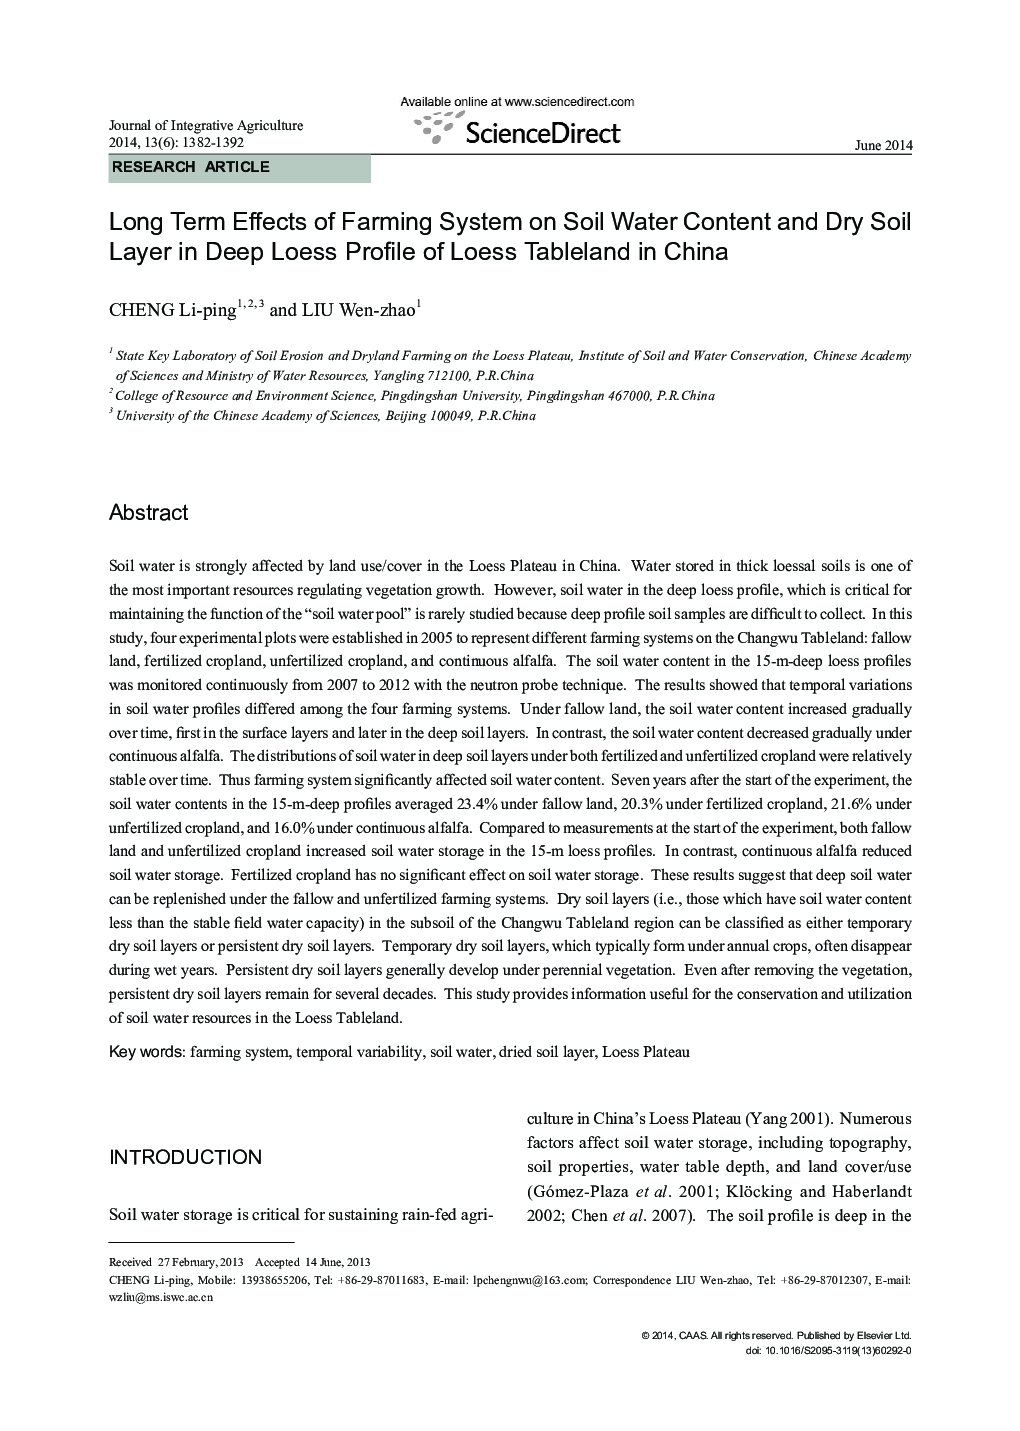 Long Term Effects of Farming System on Soil Water Content and Dry Soil Layer in Deep Loess Profile of Loess Tableland in China